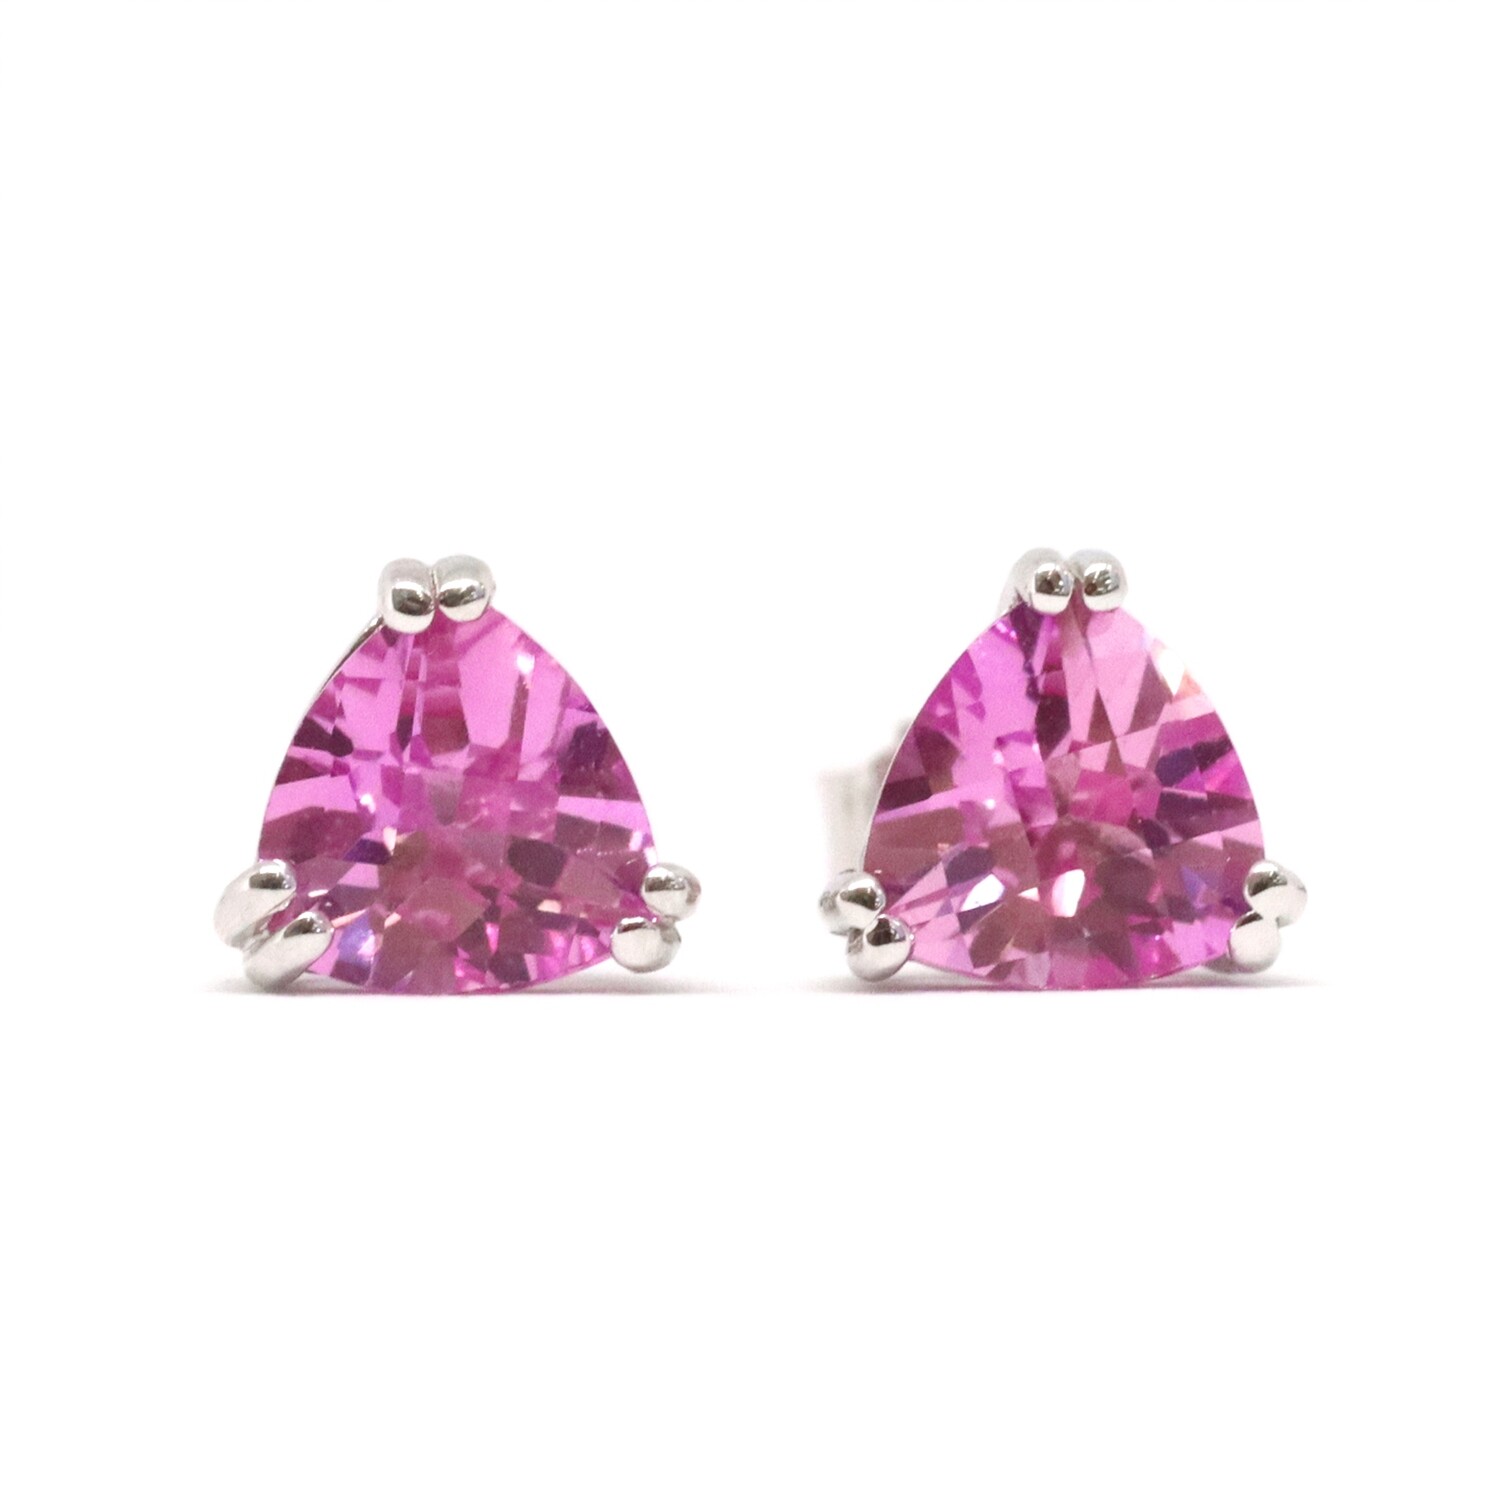 14KT White Gold Created Checkered Trillion Pink Sapphire Stud Earrings